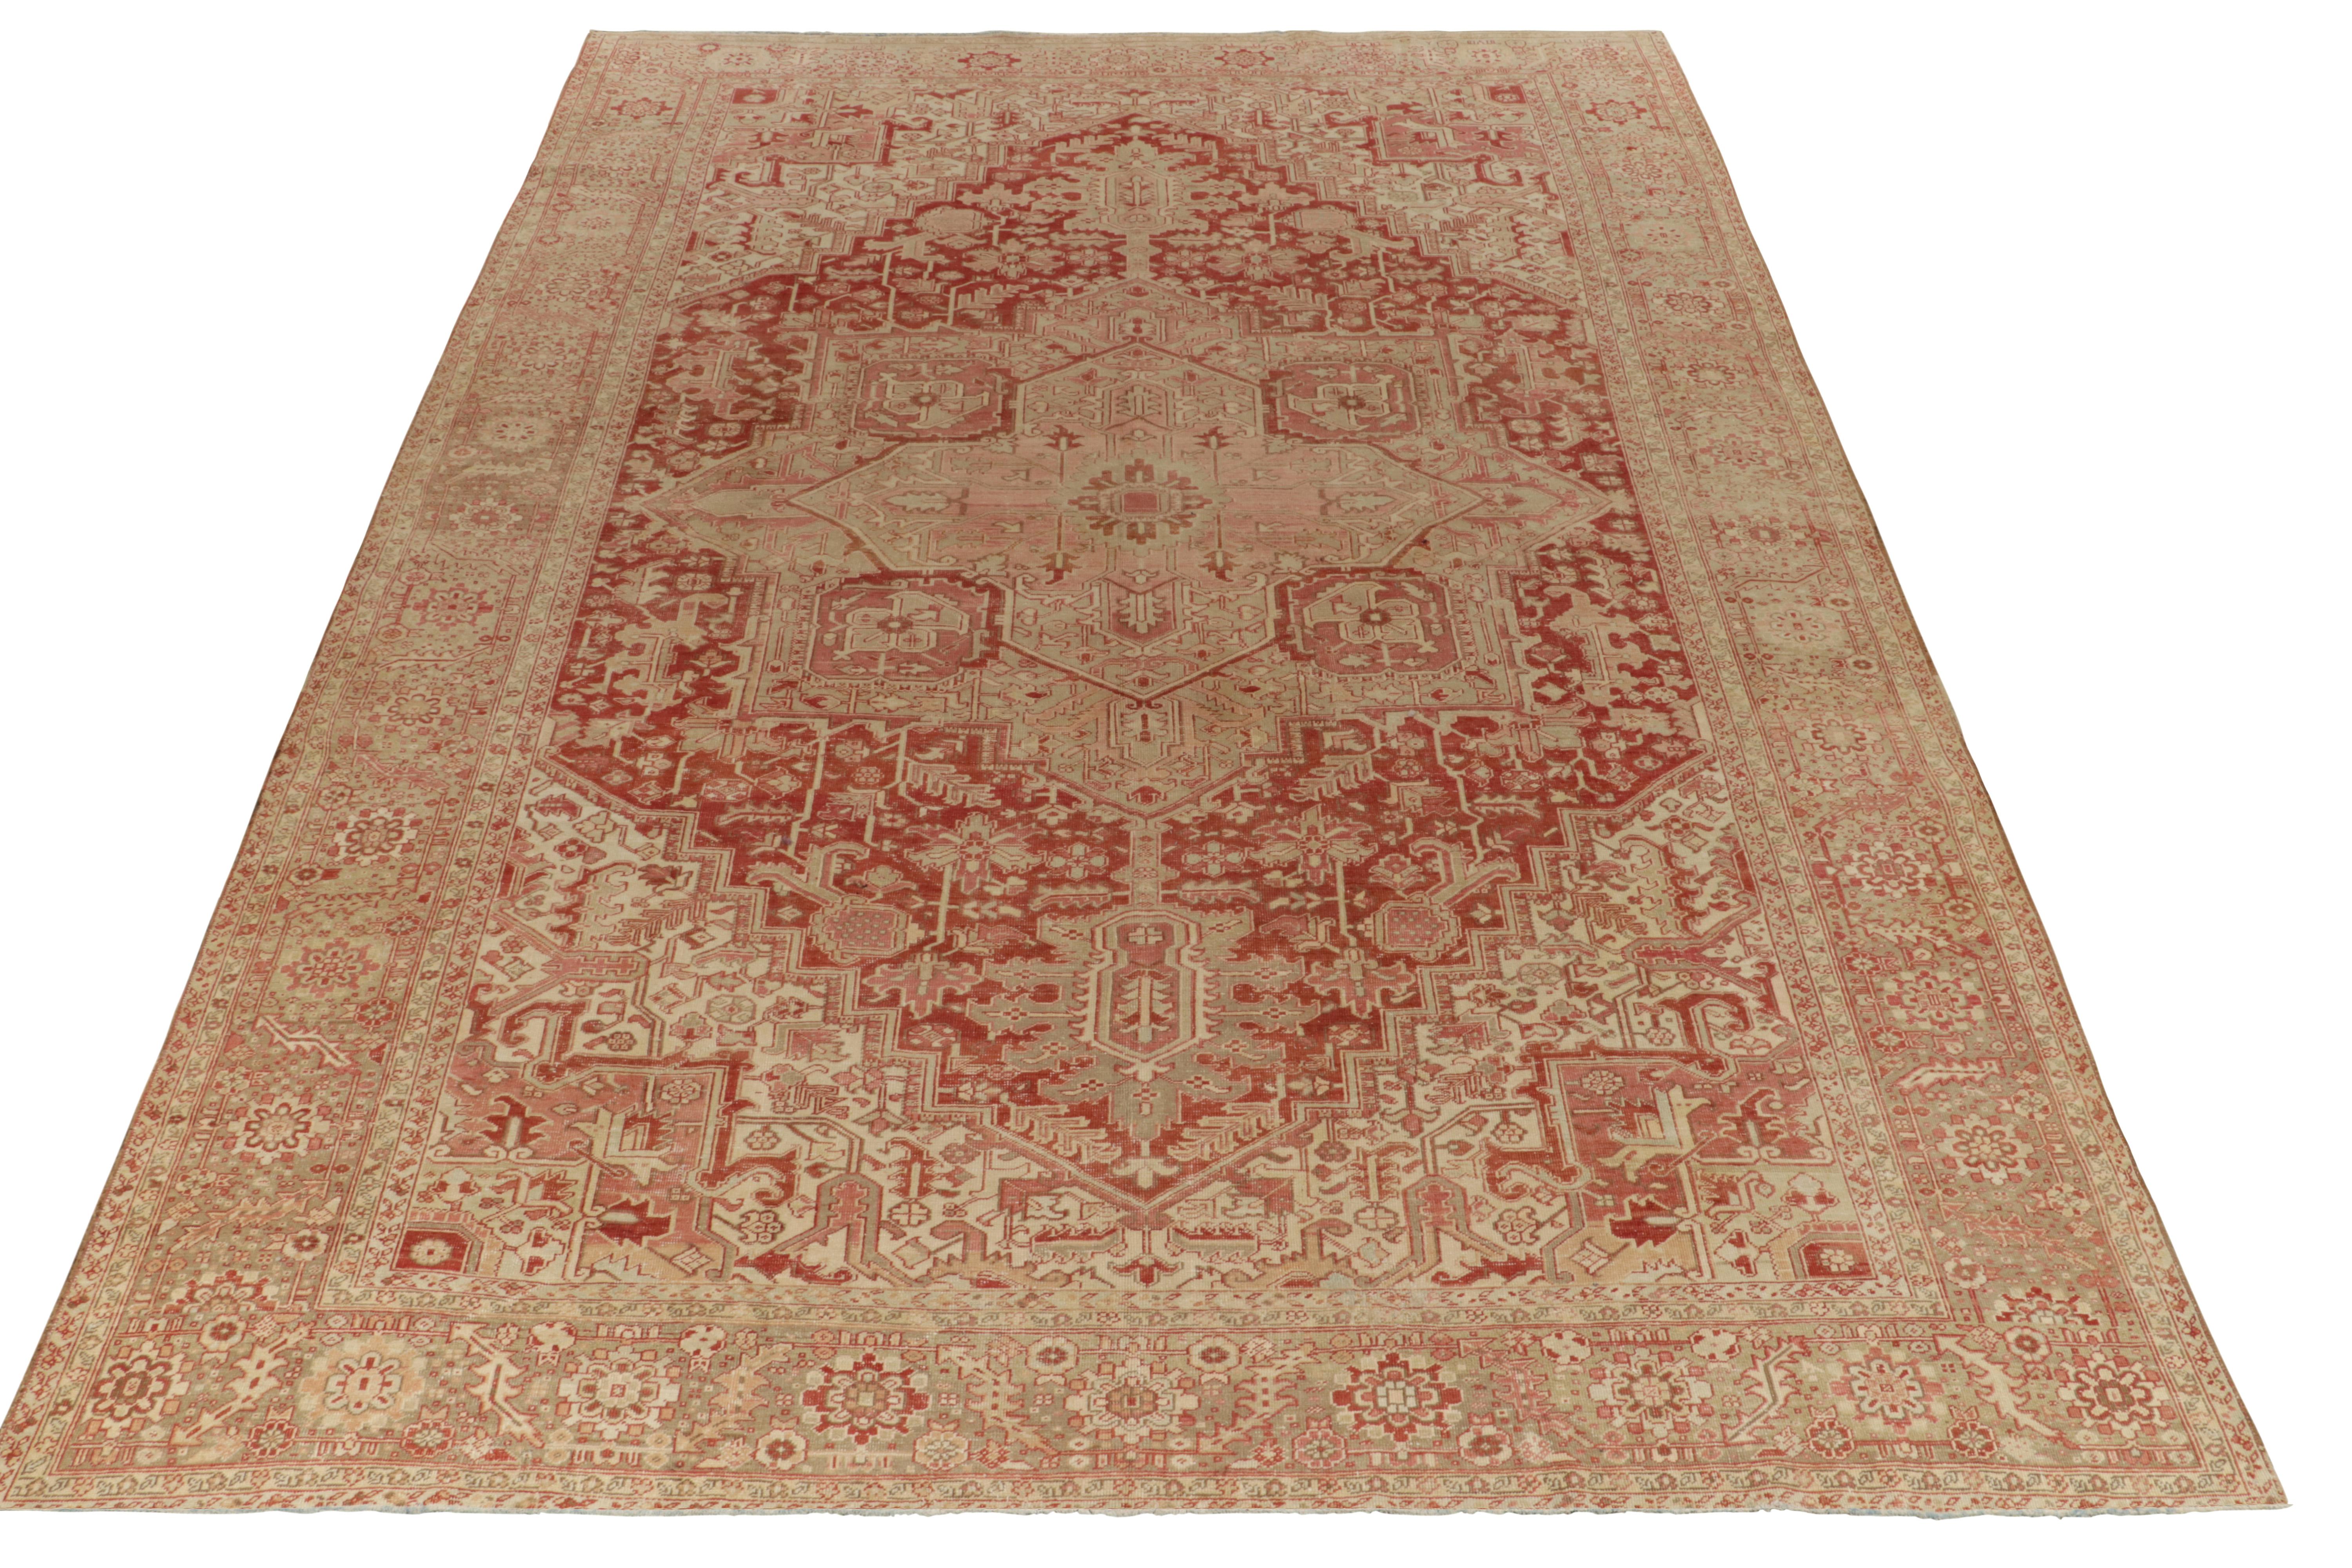 From Rug & Kilim’s Antique & Vintage collection, an alluring 11x16 Heriz Serapi rug originating from Persia circa 1950-1960. Exemplifying the rosette medallions this lineage enjoys, the rug witnesses a departure in colors with red background